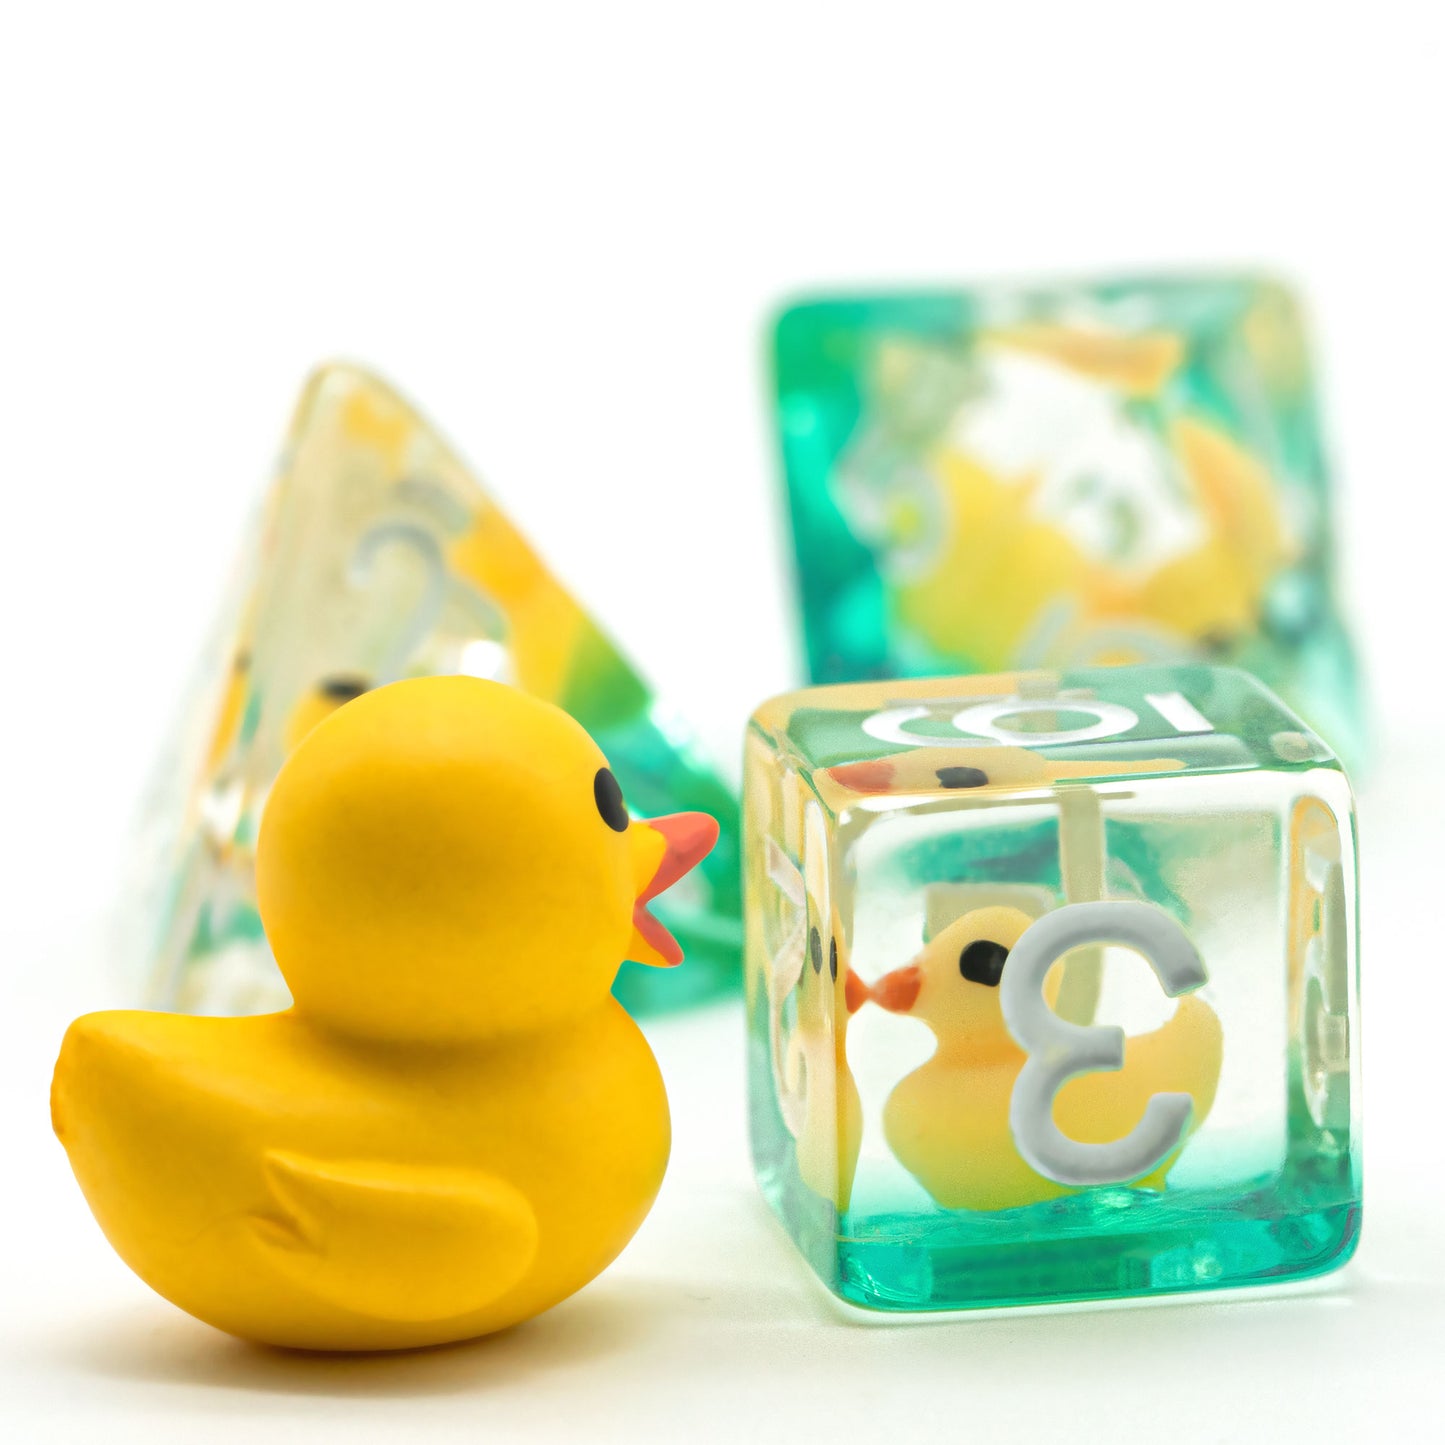 Rubber ducky staring at counterpart in d6